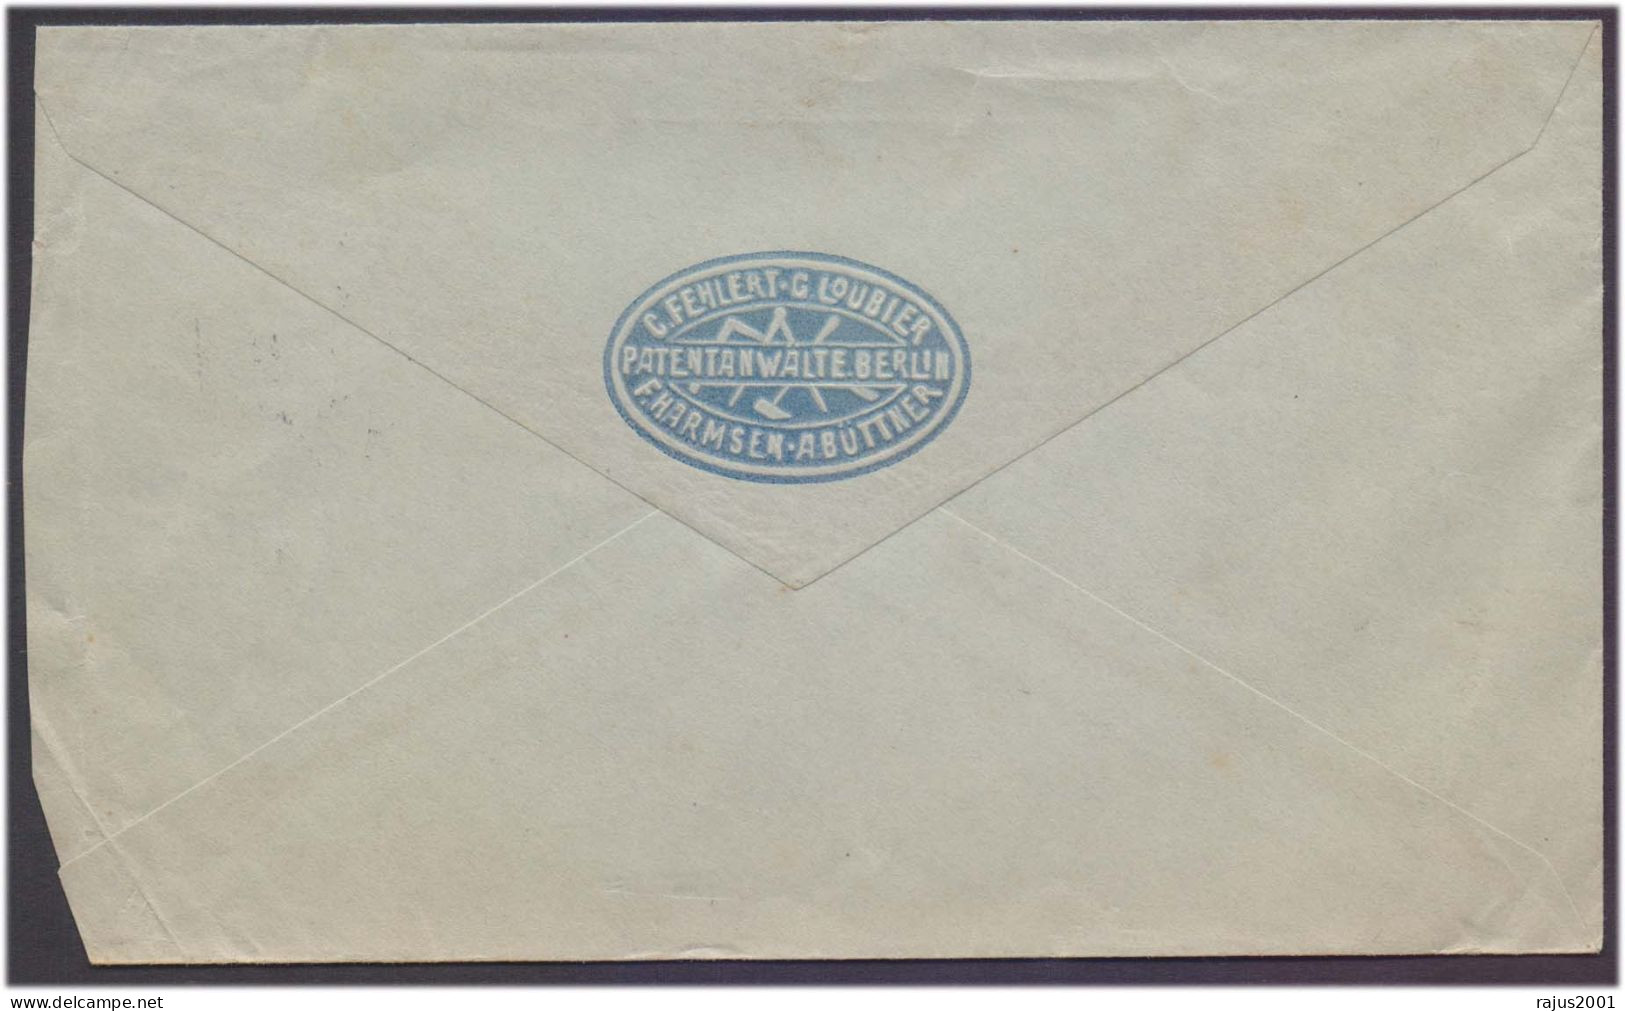 Deutsches Reich Berlin 1906, Received Cyrus Kehr  Germany Postal Stationery Cover - Briefe